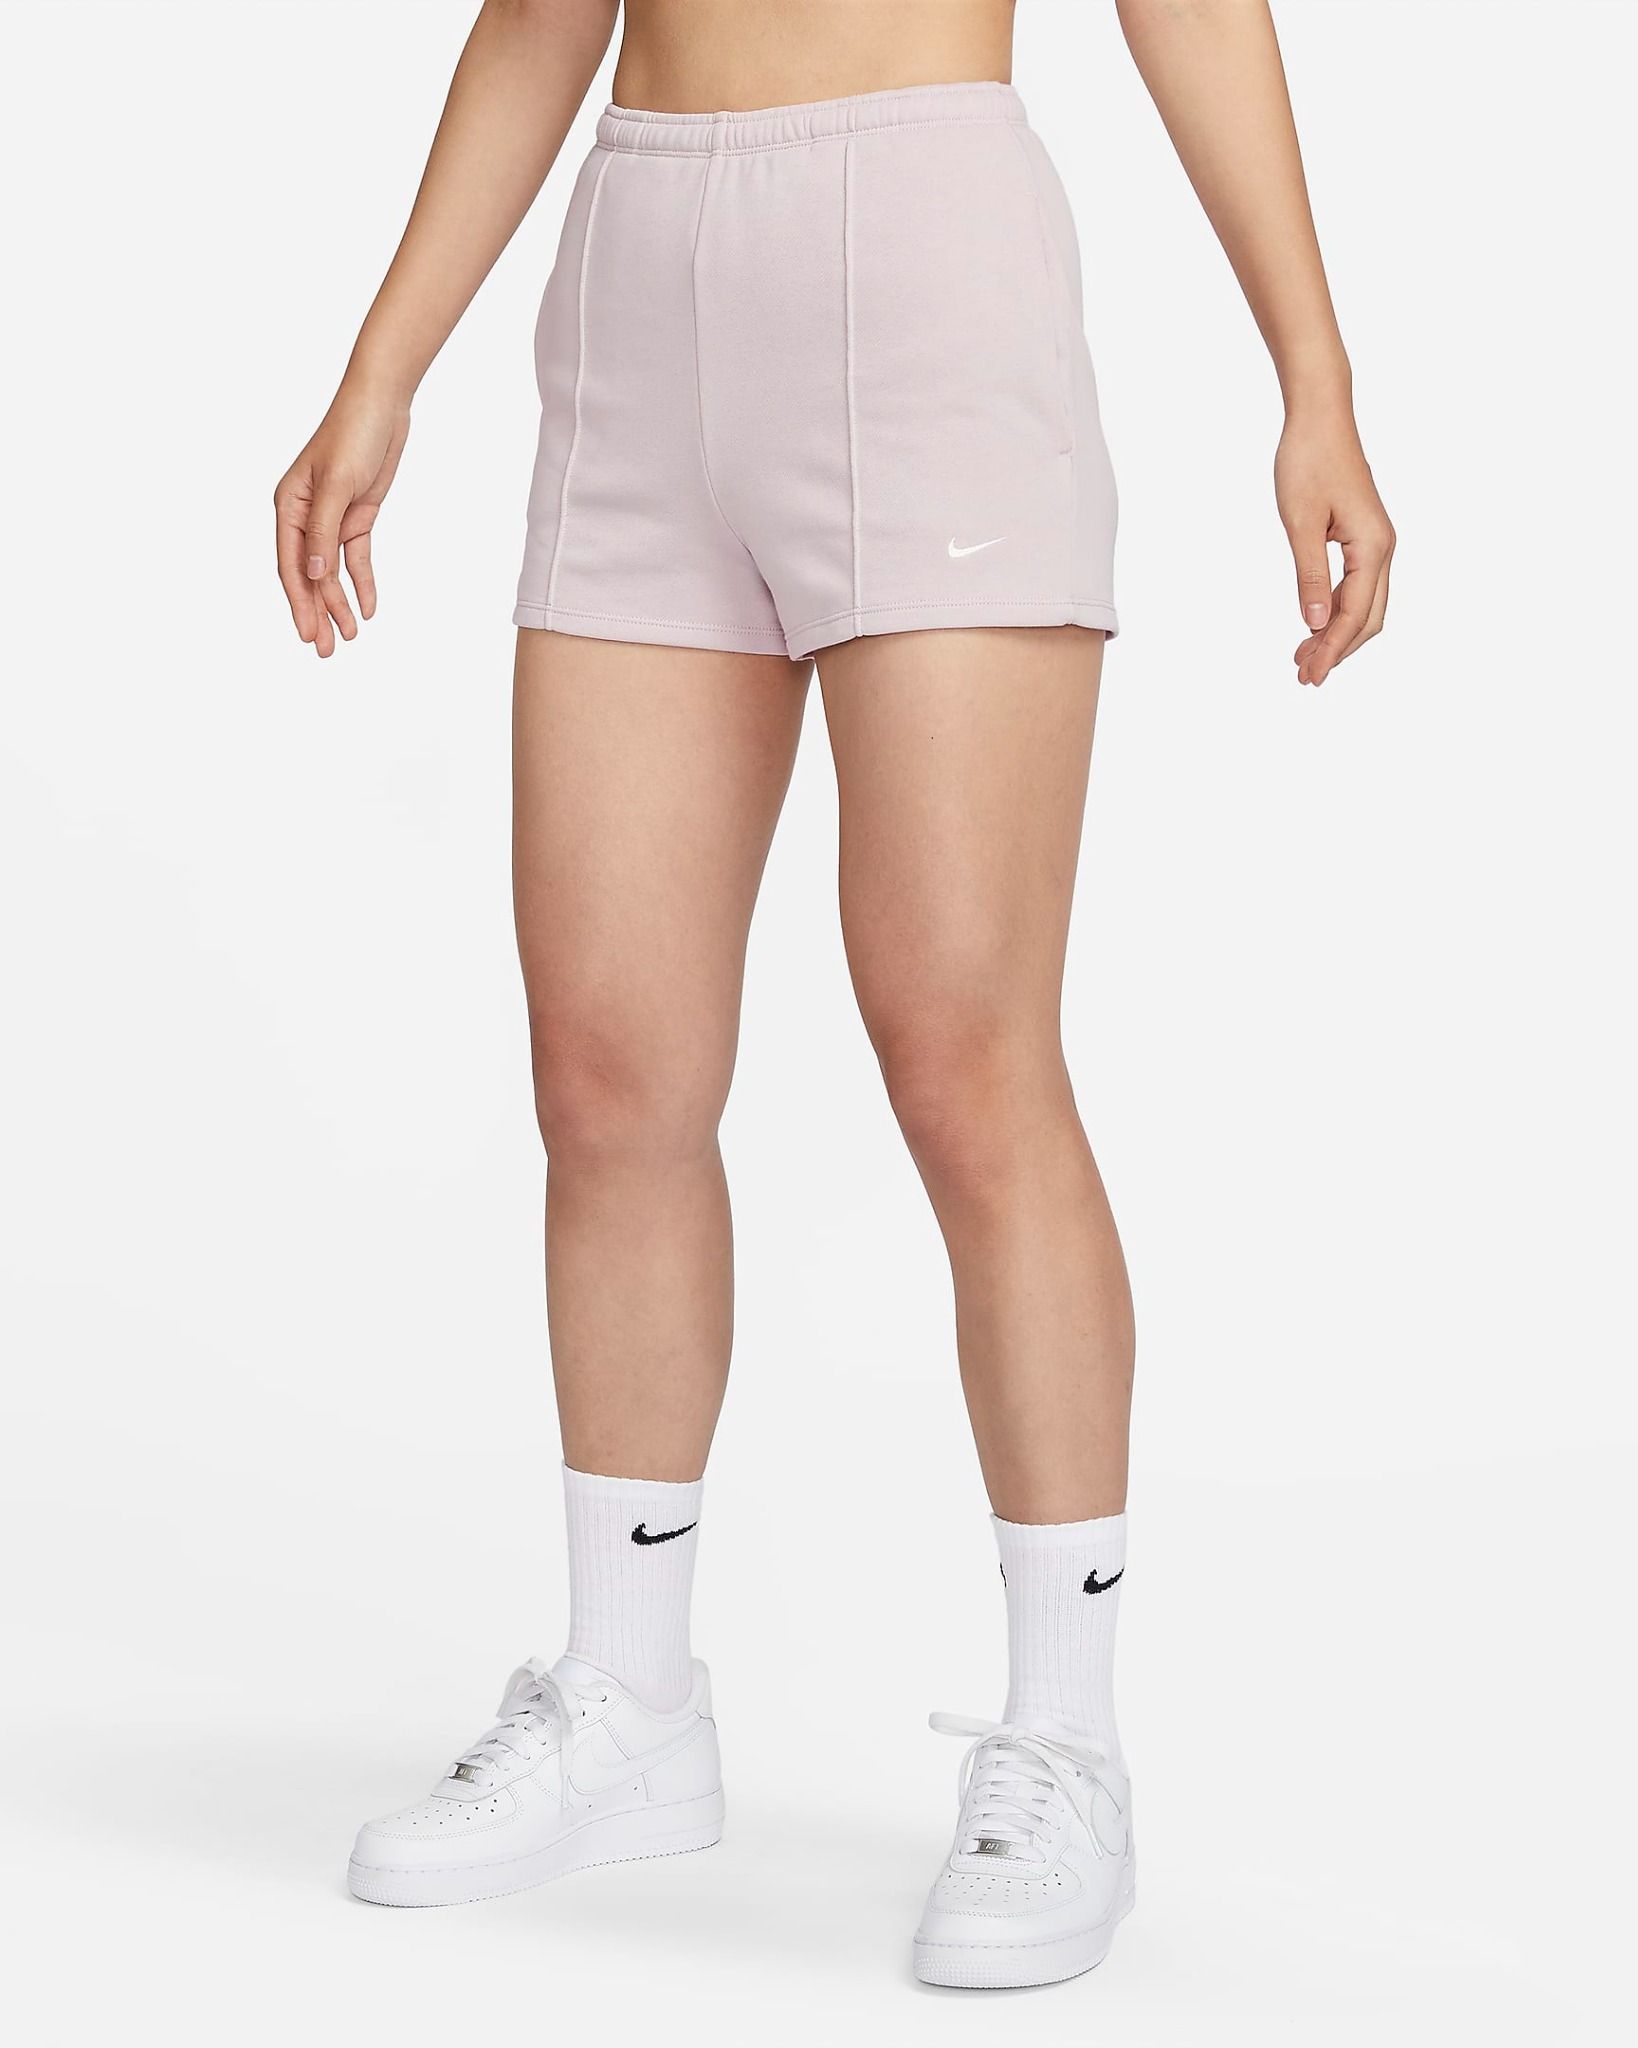 Nike - Quần ngắn thể thao Nữ Chill Terry Women's High-Waisted Slim French Terry Shorts